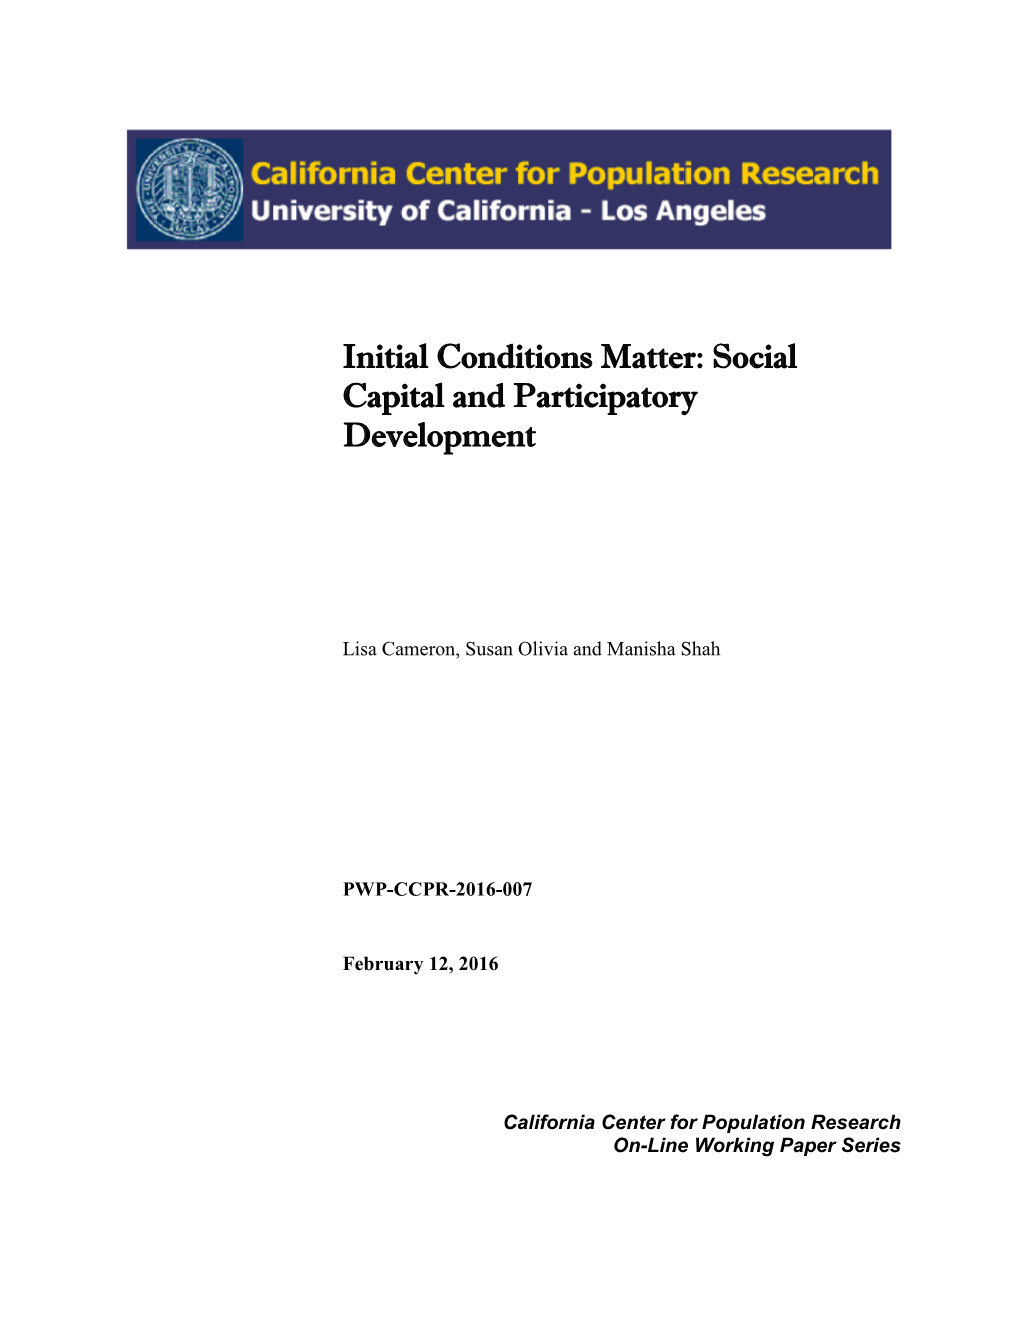 Initial Conditions Matter: Social Capital and Participatory Development∗